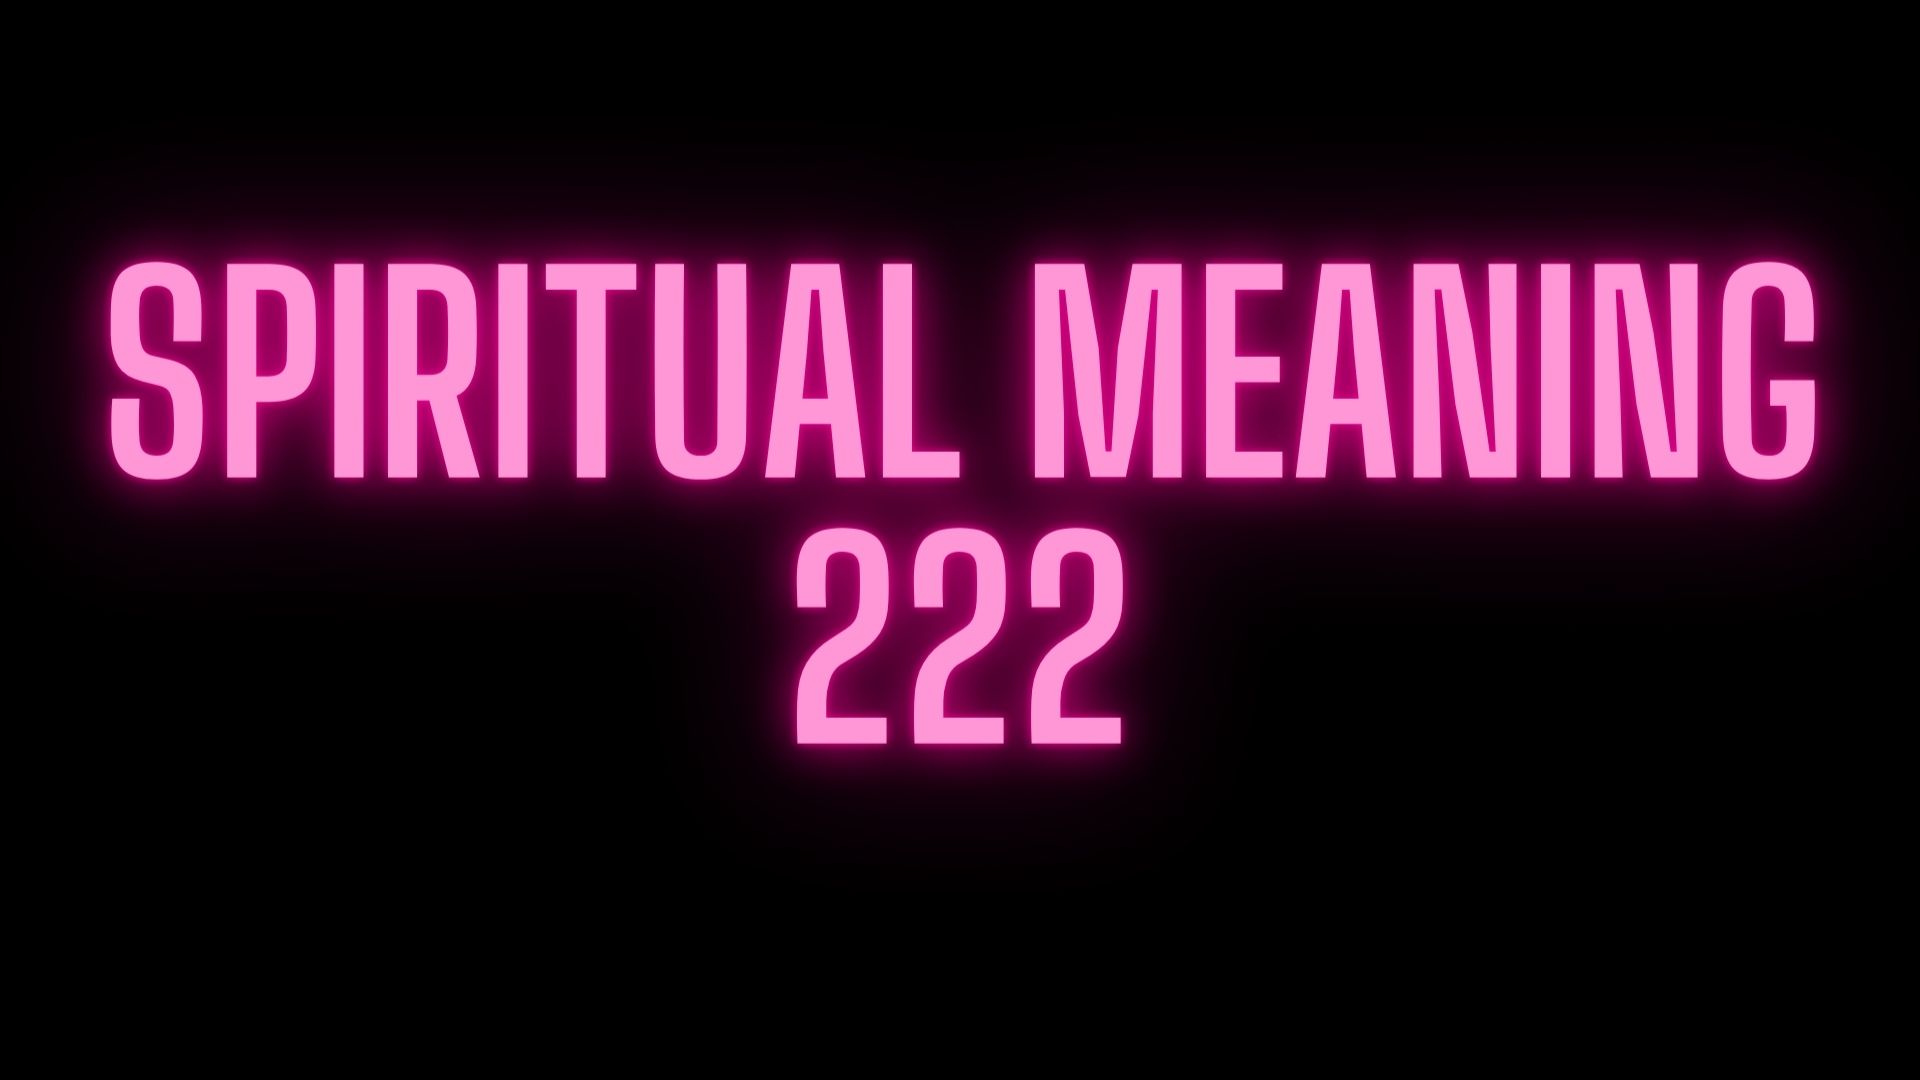 Spiritual Meaning 222 - Focus On Finding Balance And Harmony